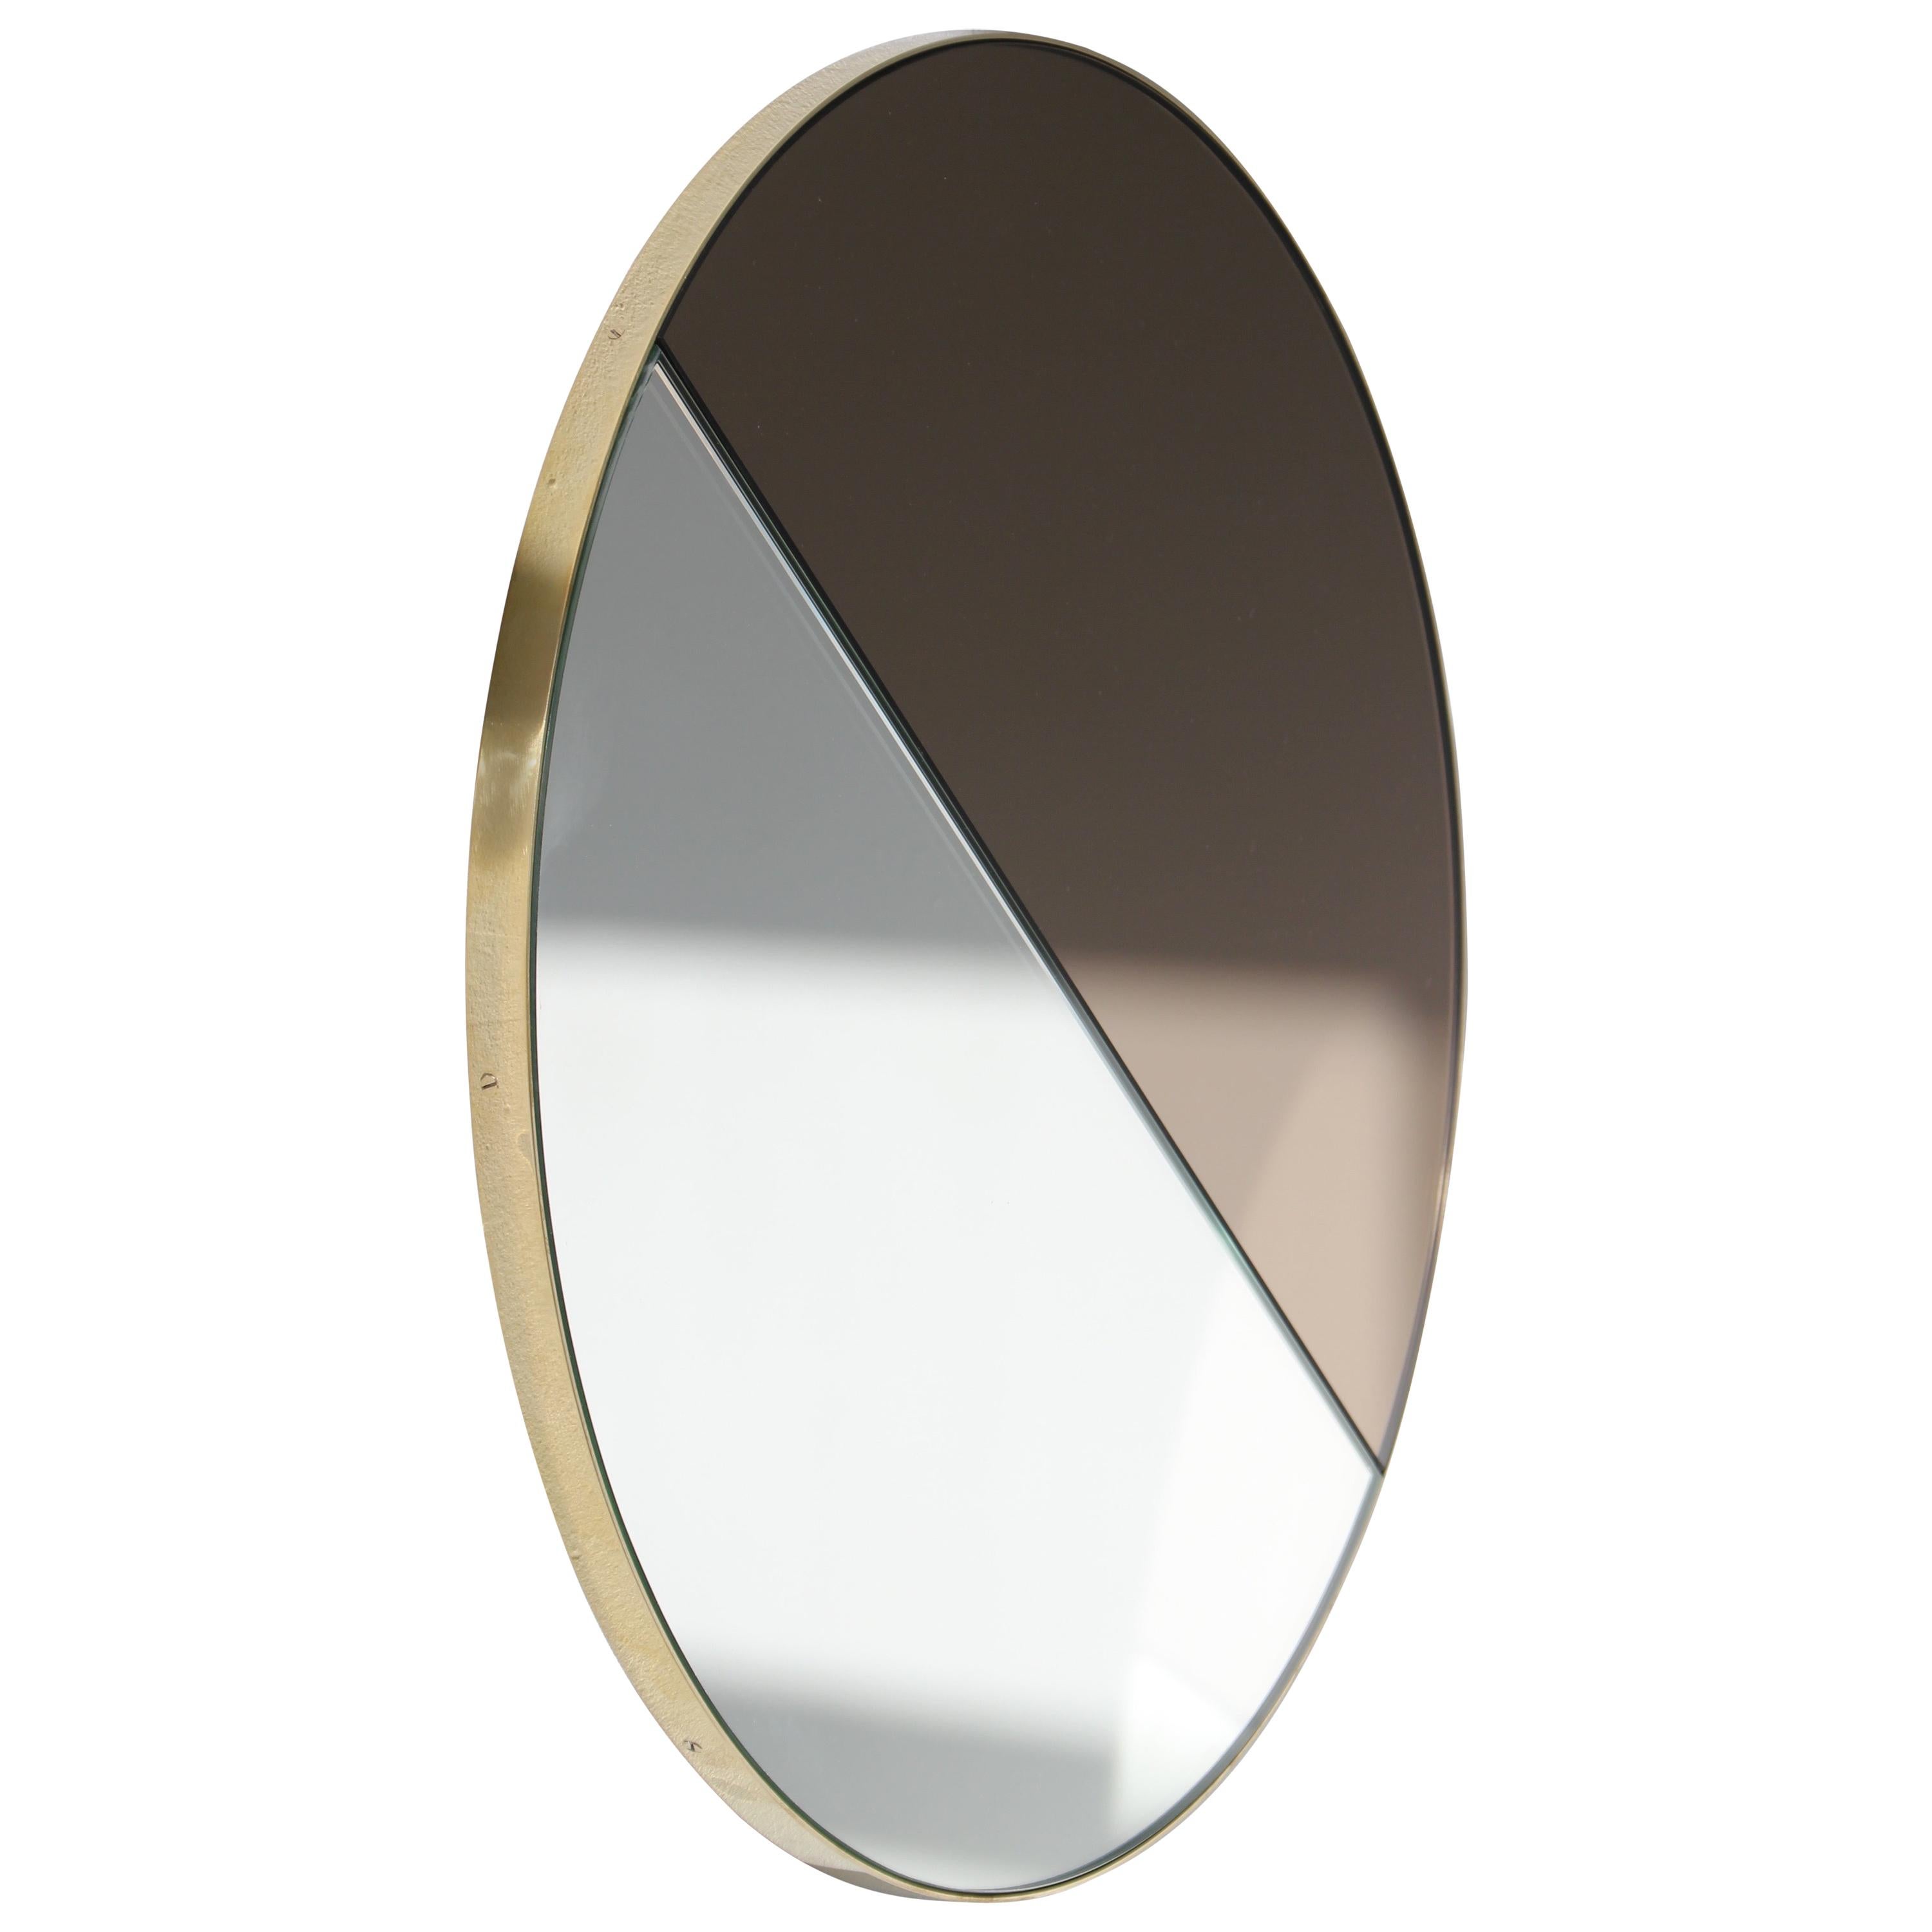 Orbis Dualis Mixed Tinted Silver and Bronze Round Mirror with Brass Frame, XL For Sale